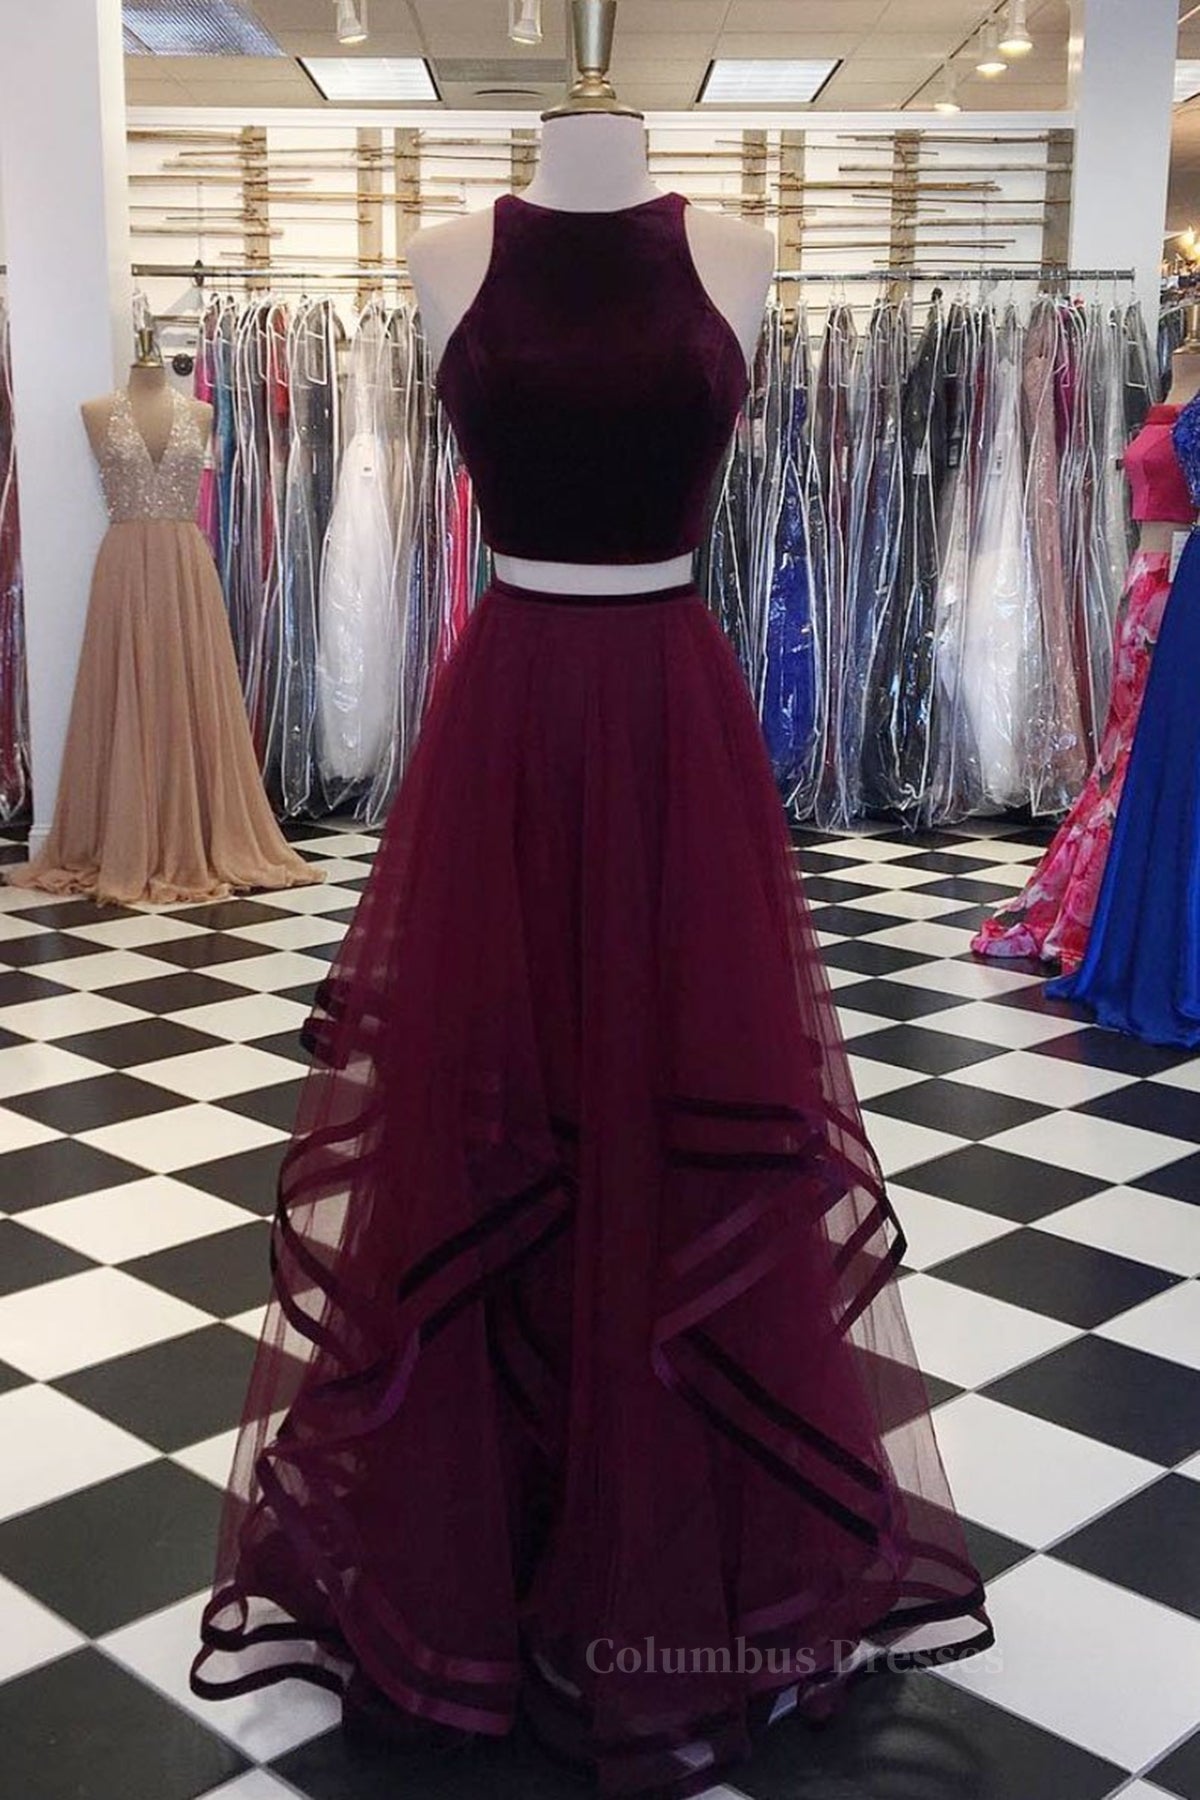 Beauty Dress, Two Pieces Maroon Long Prom Dress, Dark Burgundy 2 Pieces Formal Evening Dresses